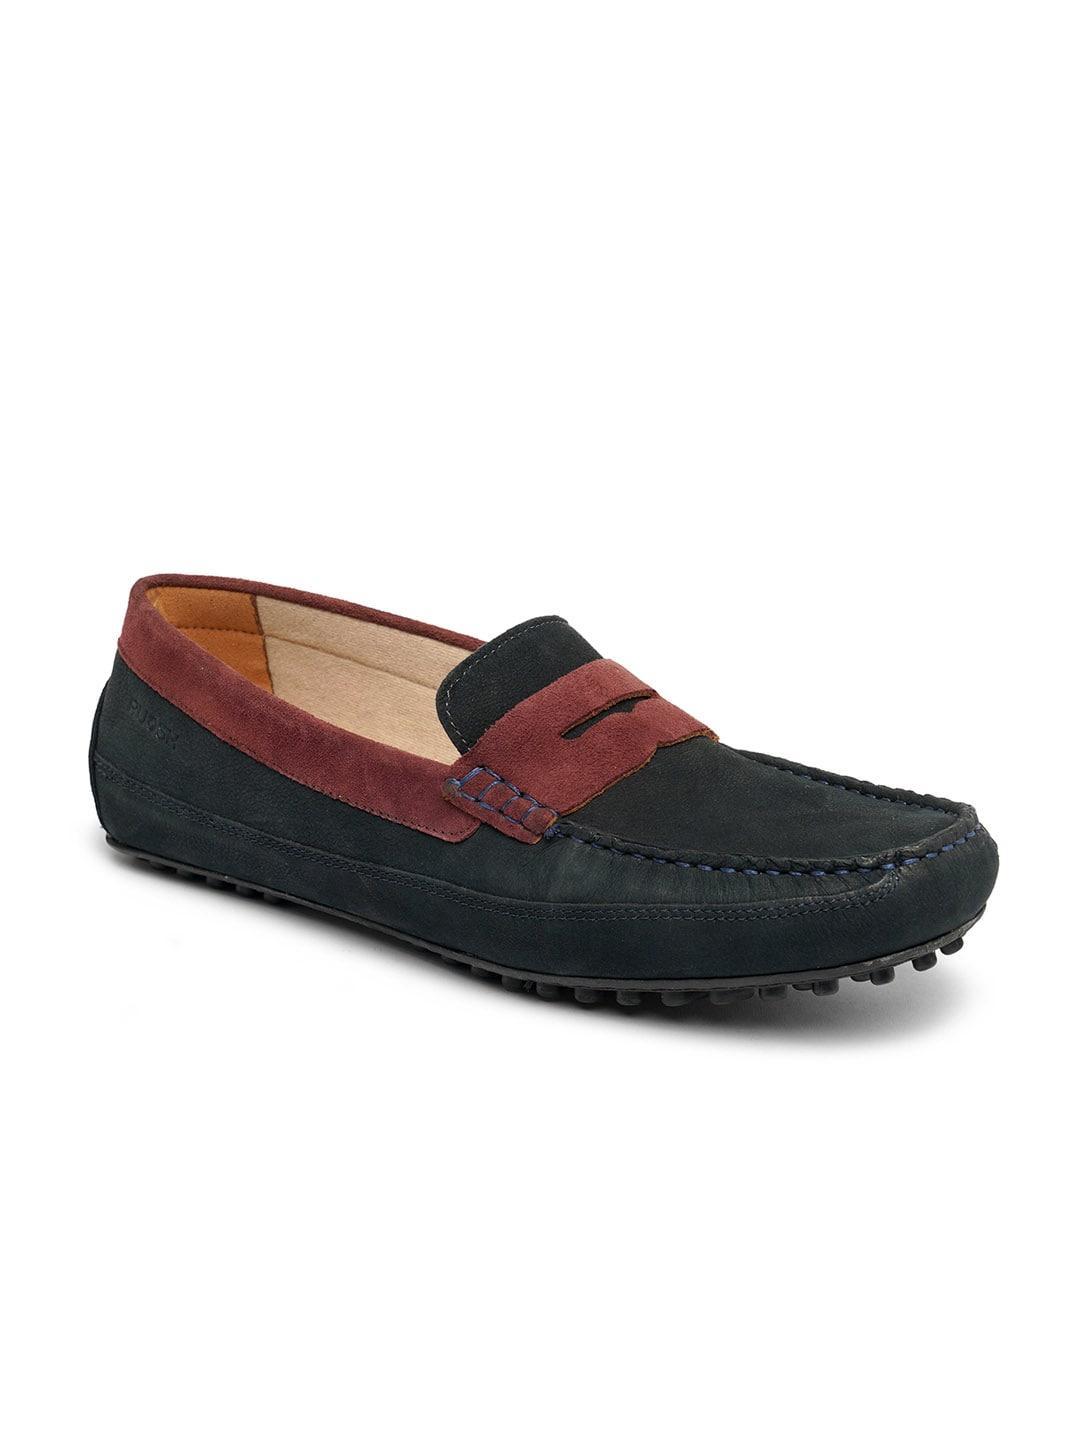 ruosh-men-comfort-insole-driving-shoes